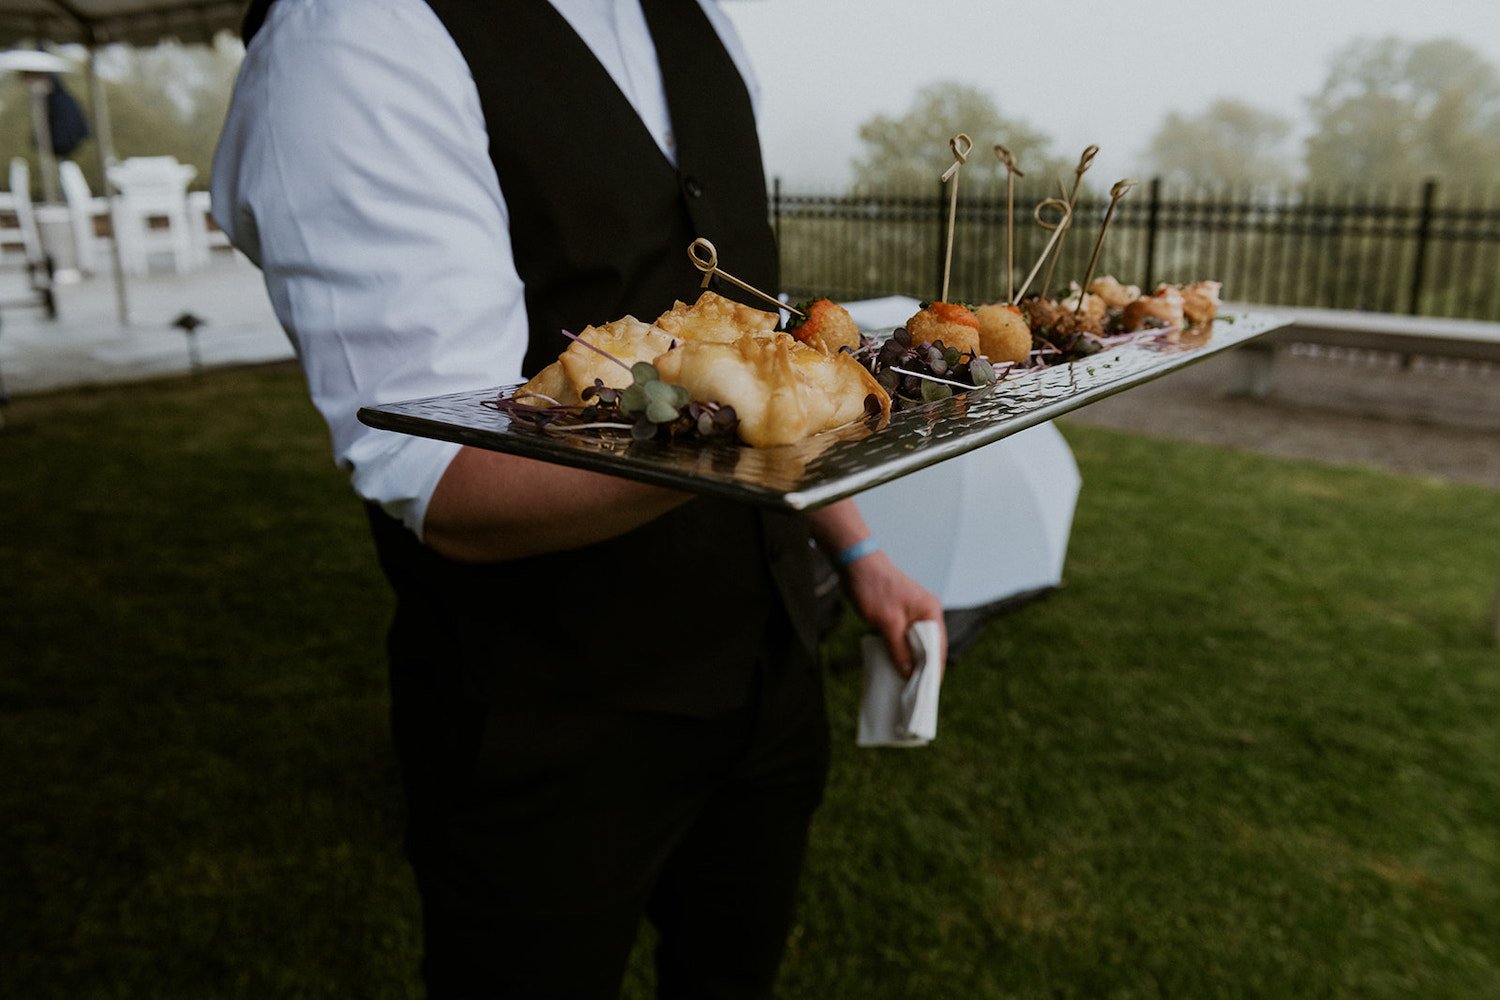 Server passing out Hors D'oeuvre to the wedding guests.